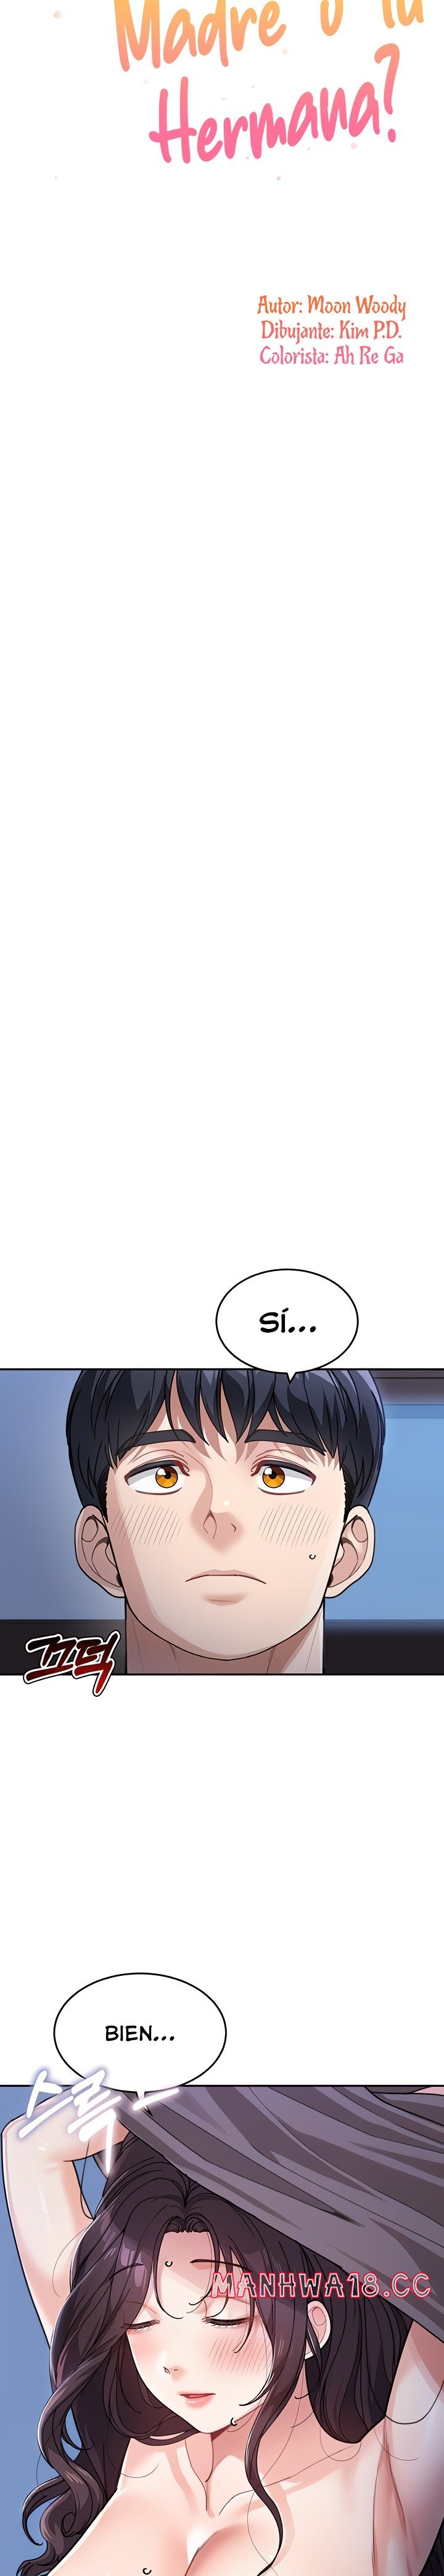 is-it-your-mother-or-sister-raw-chap-33-2